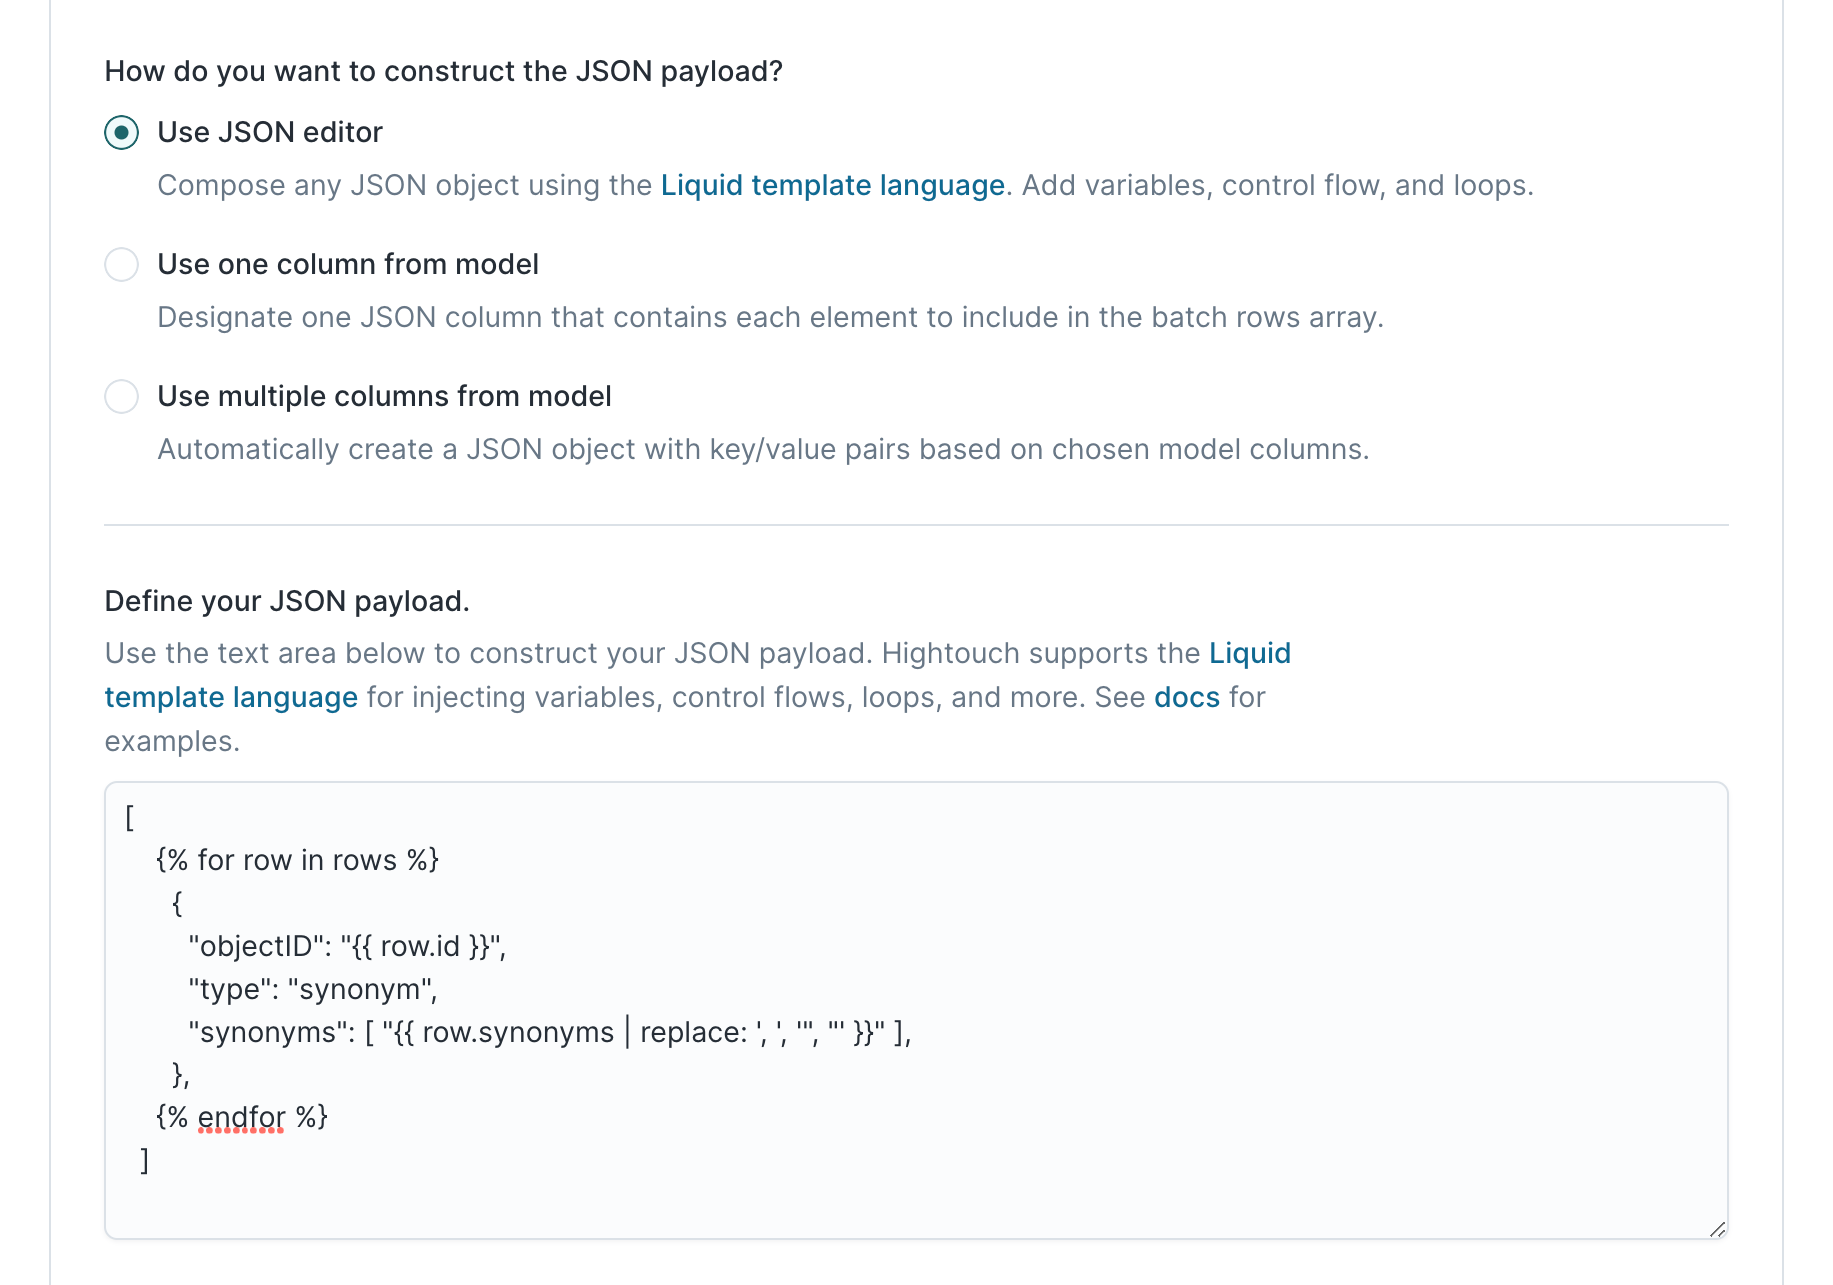 Configuring an Algolia sync in the Hightouch UI